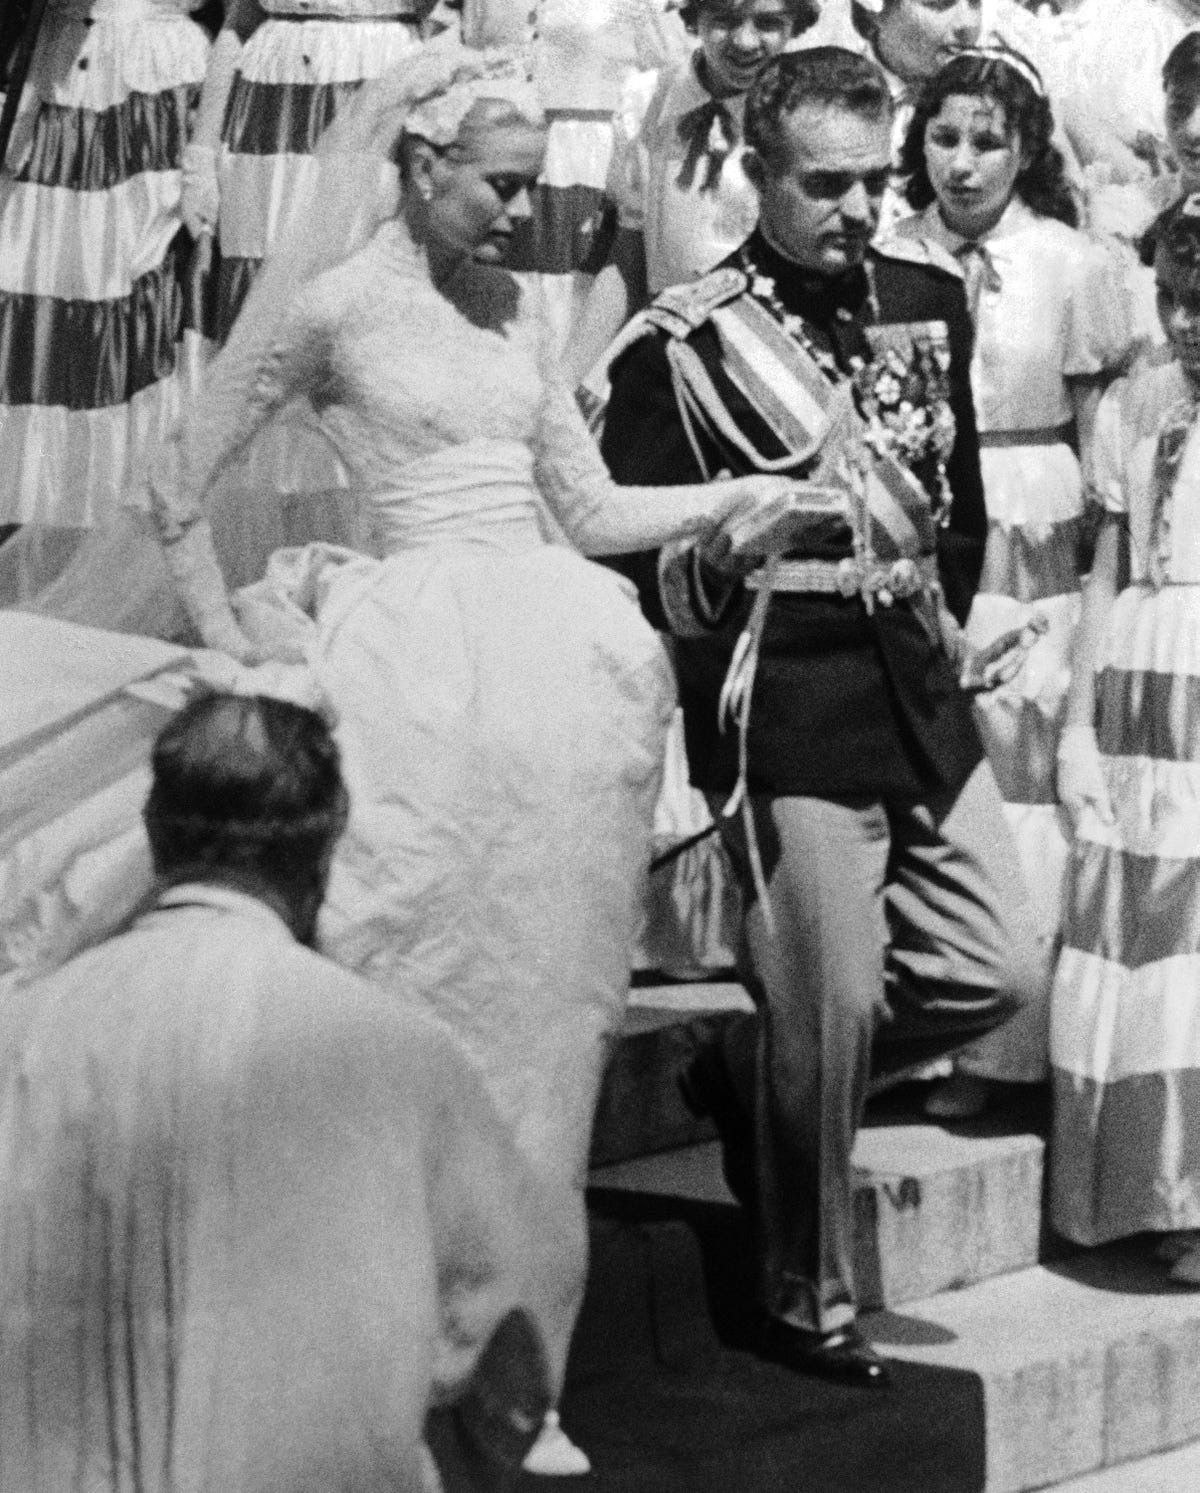 Prince Rainier leads his bride, Grace Kelly, after their wedding at Monaco Cathedral on April 19, 1956